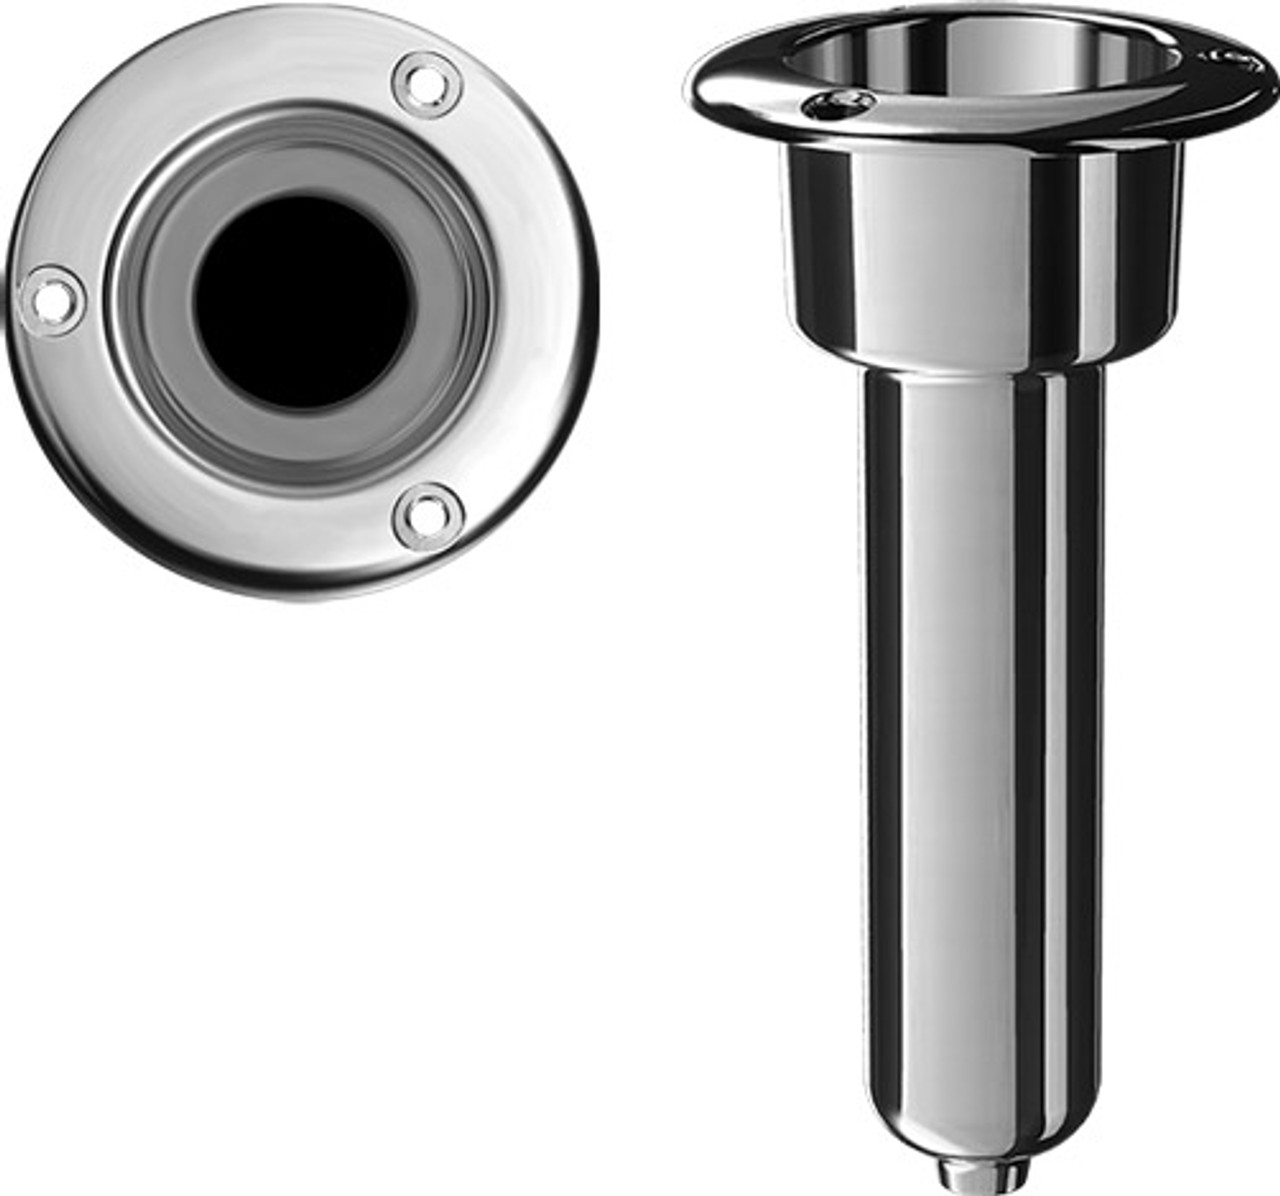 Mate Series Stainless Steel 0 Rod & Cup Holder - Drain - Round Top